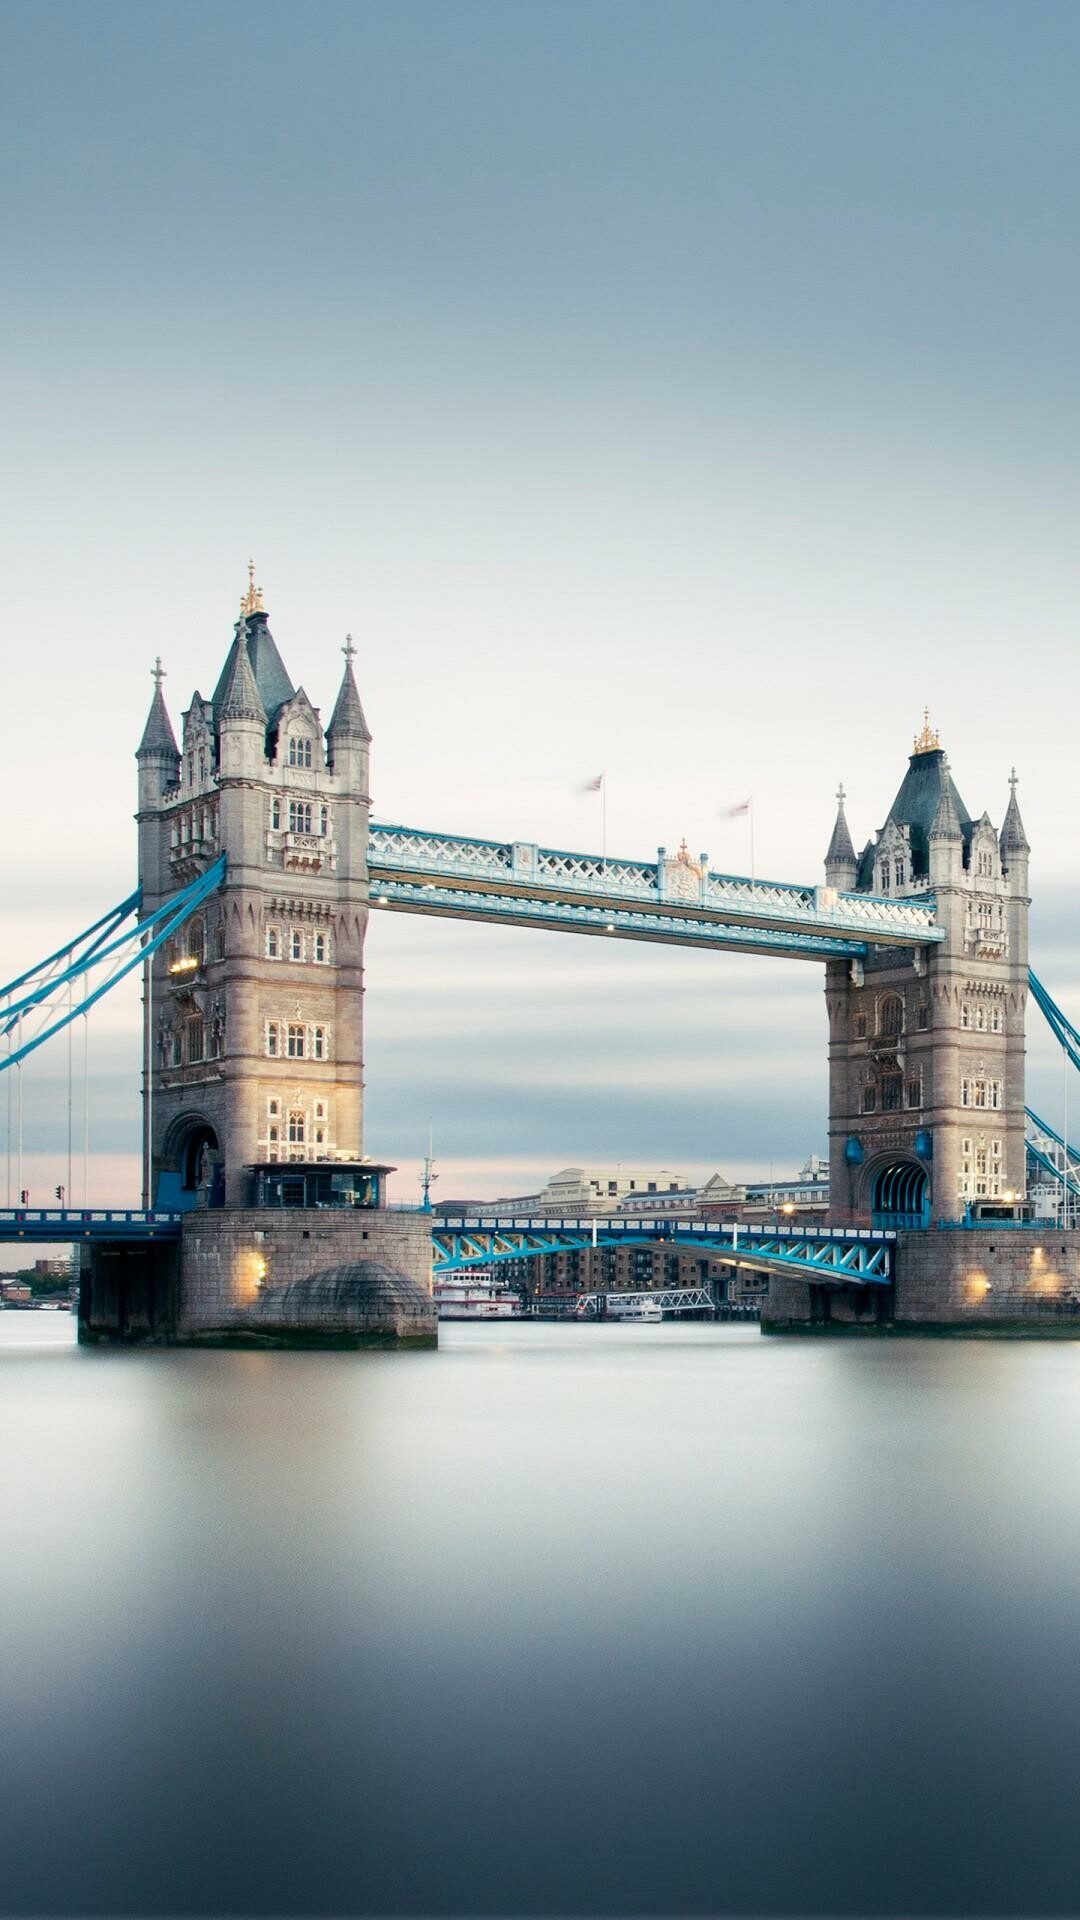 Tower Bridge: A two-sided suspension bridge with a magnificent drawbridge. 1080x1920 Full HD Background.